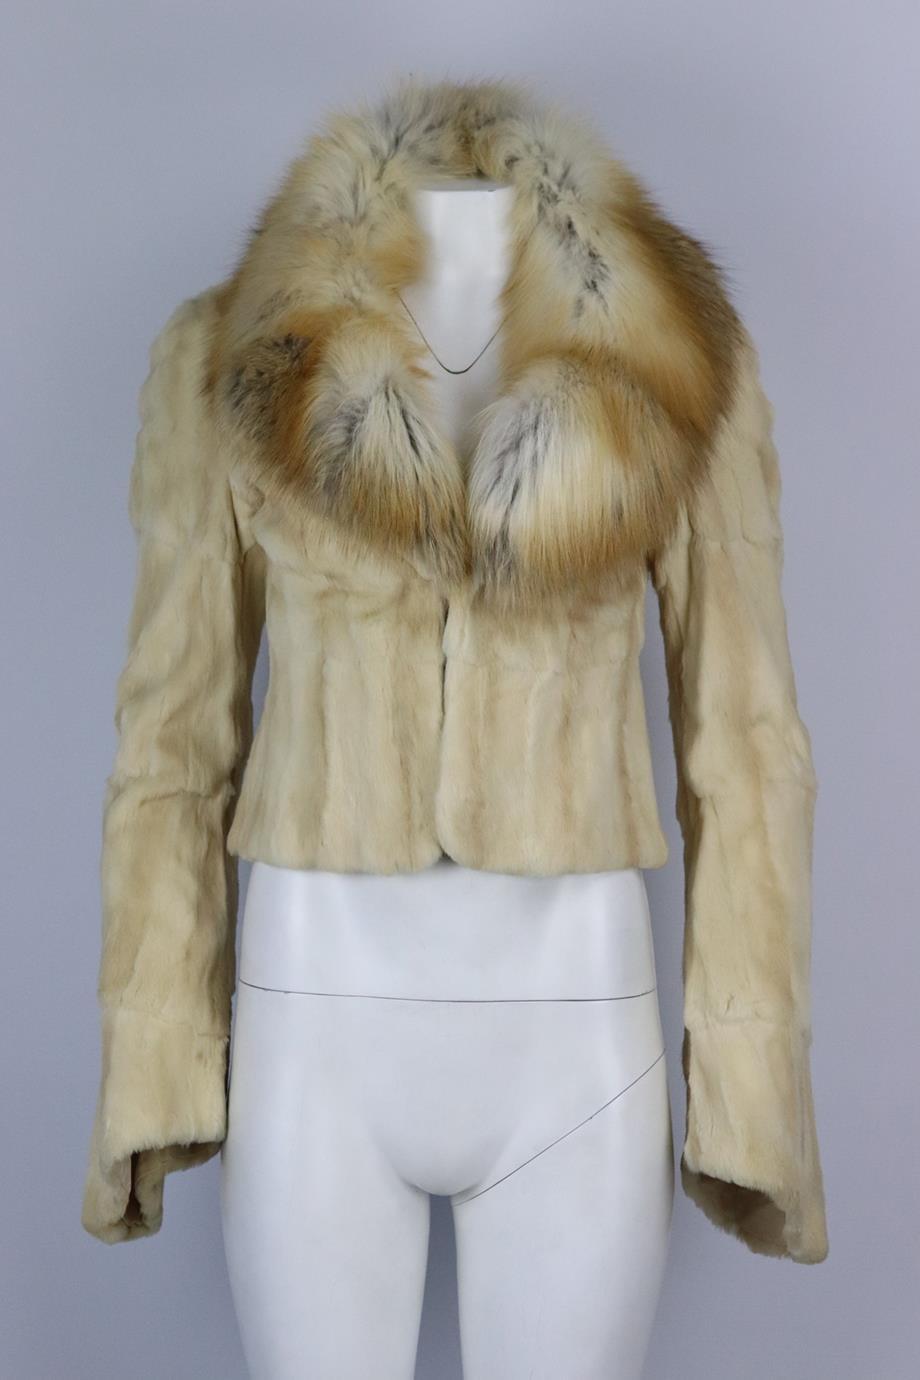 Roberto Cavalli cropped fox and rabbit fur jacket. Cream and tan. Long sleeve, v-neck. Hook and eye fastening at the front. Size: Medium (UK 10, US 6, IT 42, FR 38). Shoulder to shoulder: 15 in. Bust: 33 in. Waist: 31 in. Hips: 32 in. Length: 19 in.